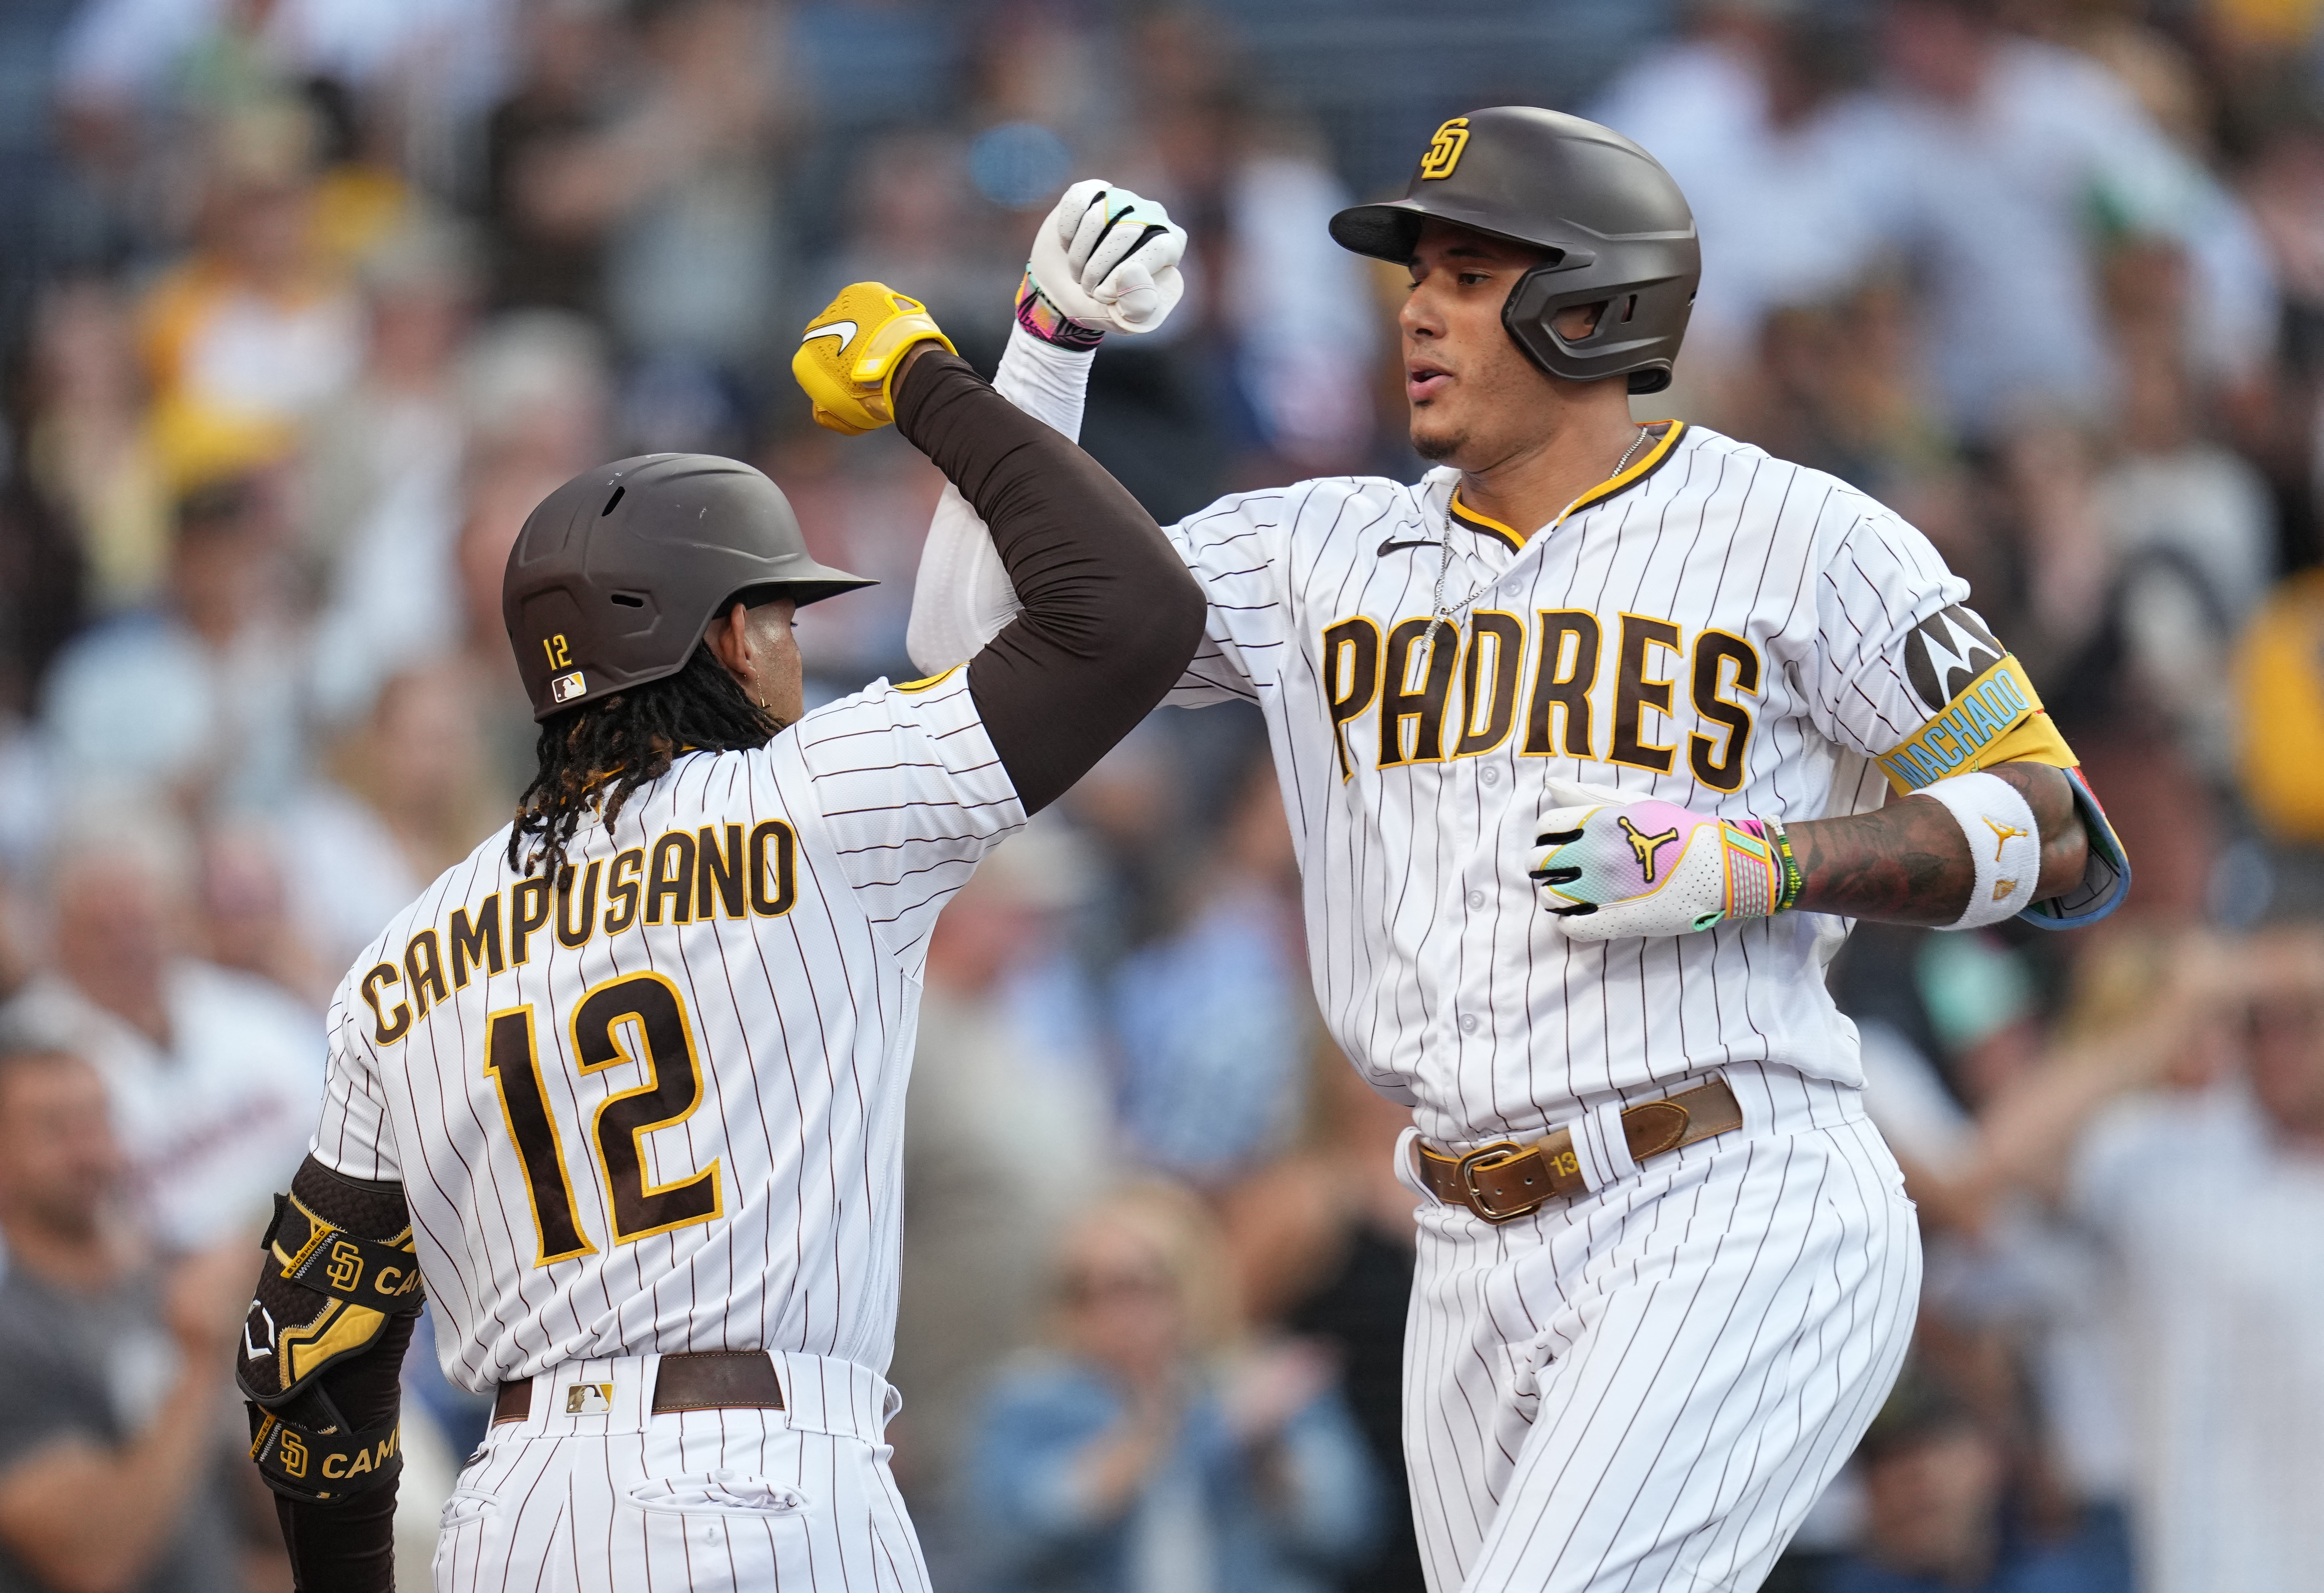 Machado, Soto and Sánchez homer to help the Padres beat the